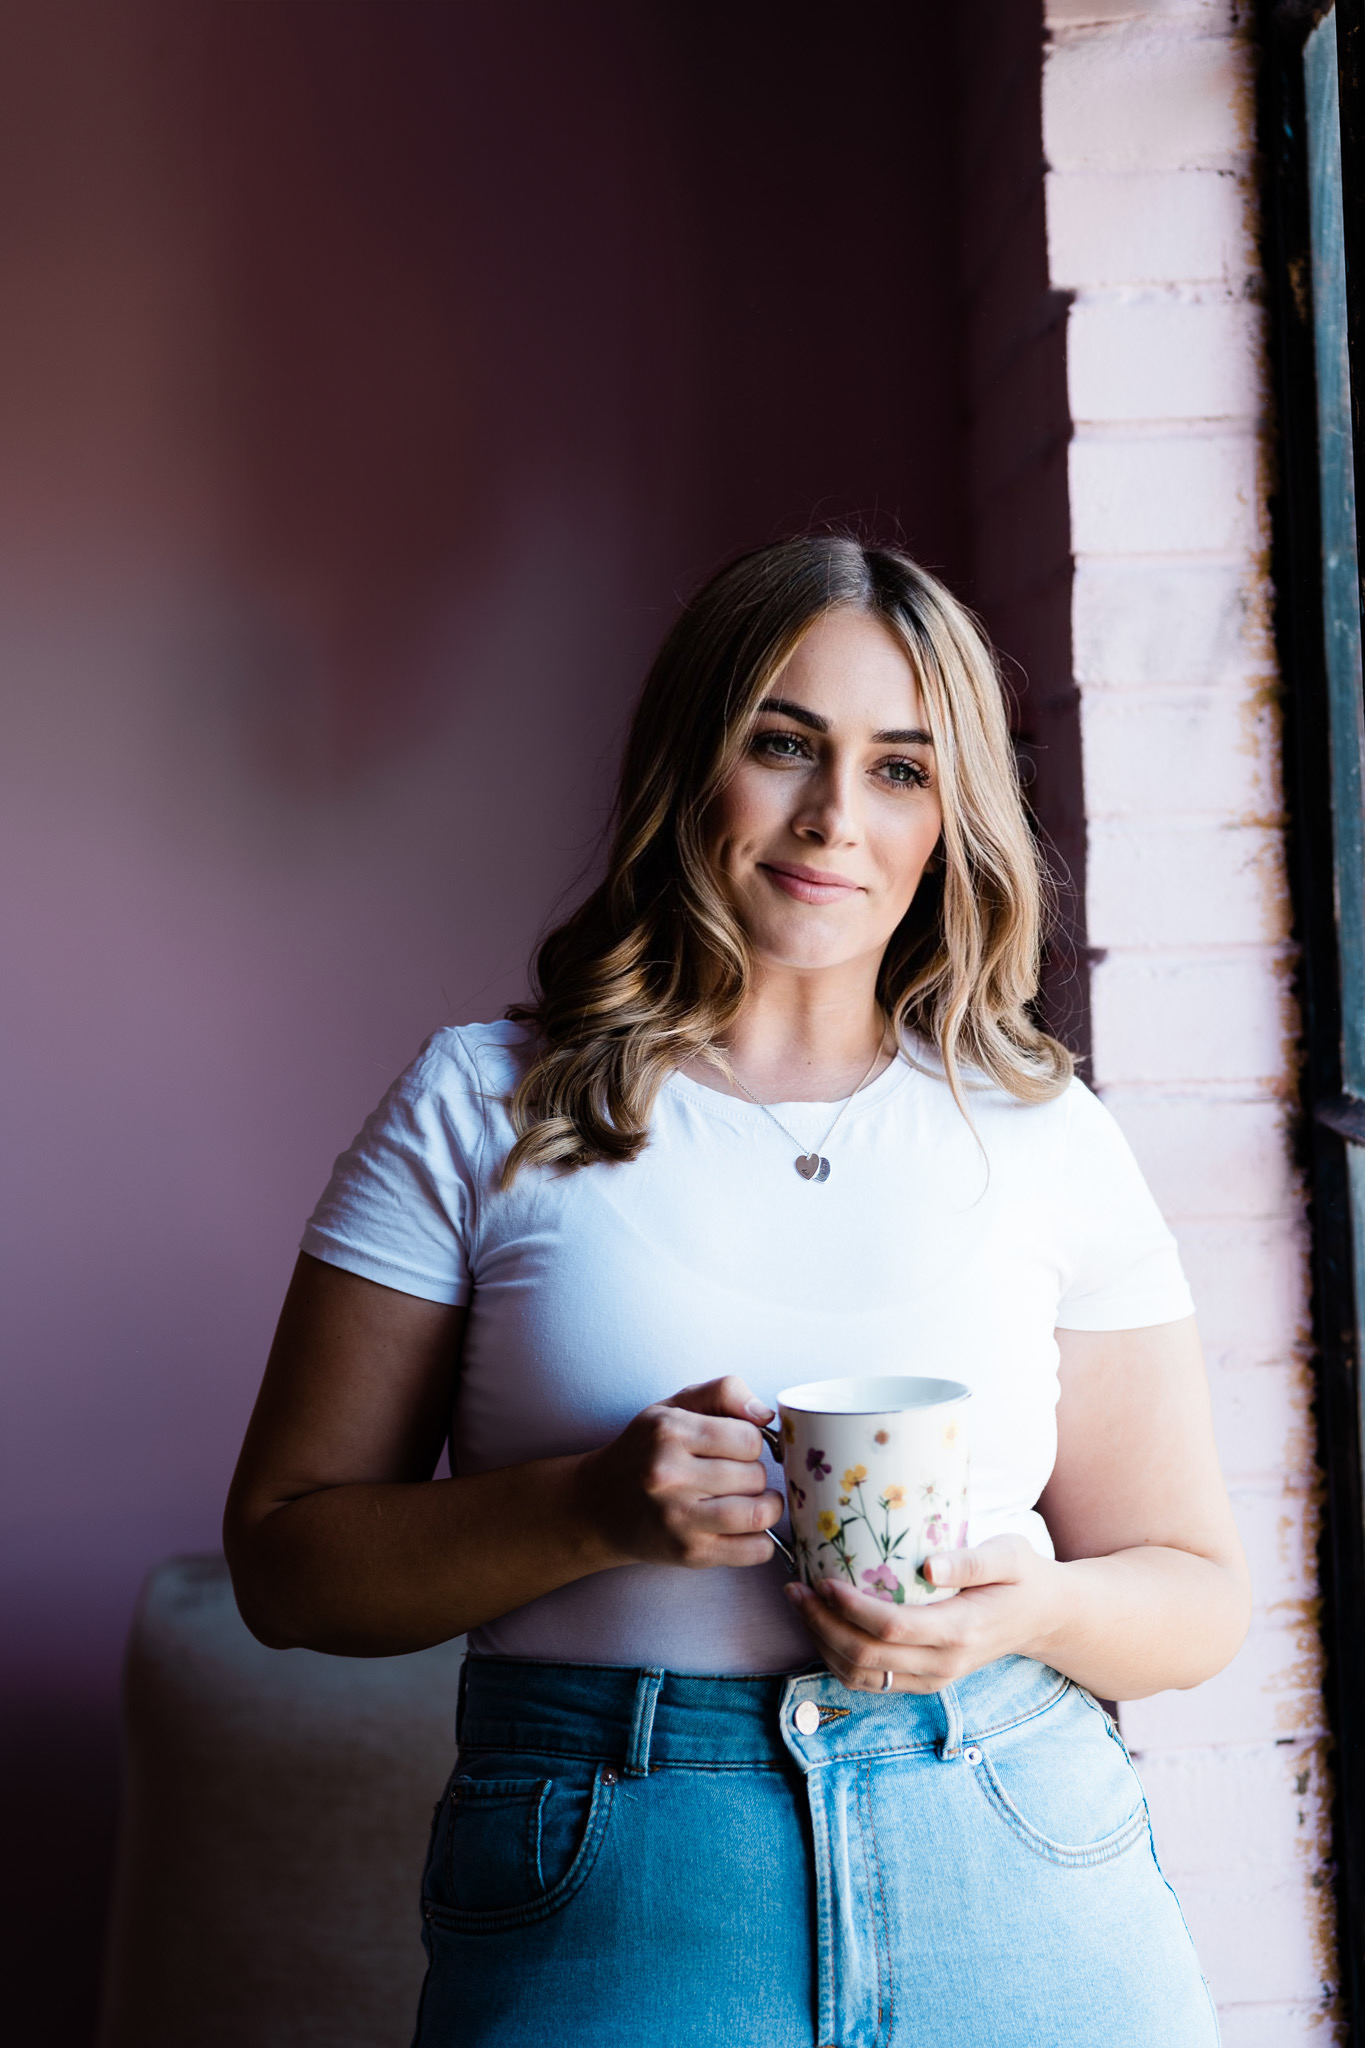 Steph Honey, host of 'The Brand Essentials' podcast, Episode #1: 'The Truth About Branding', poses with a charming smile, holding a floral mug, embodying a blend of professionalism and approachability, perfect for creative entrepreneurs seeking branding insights.